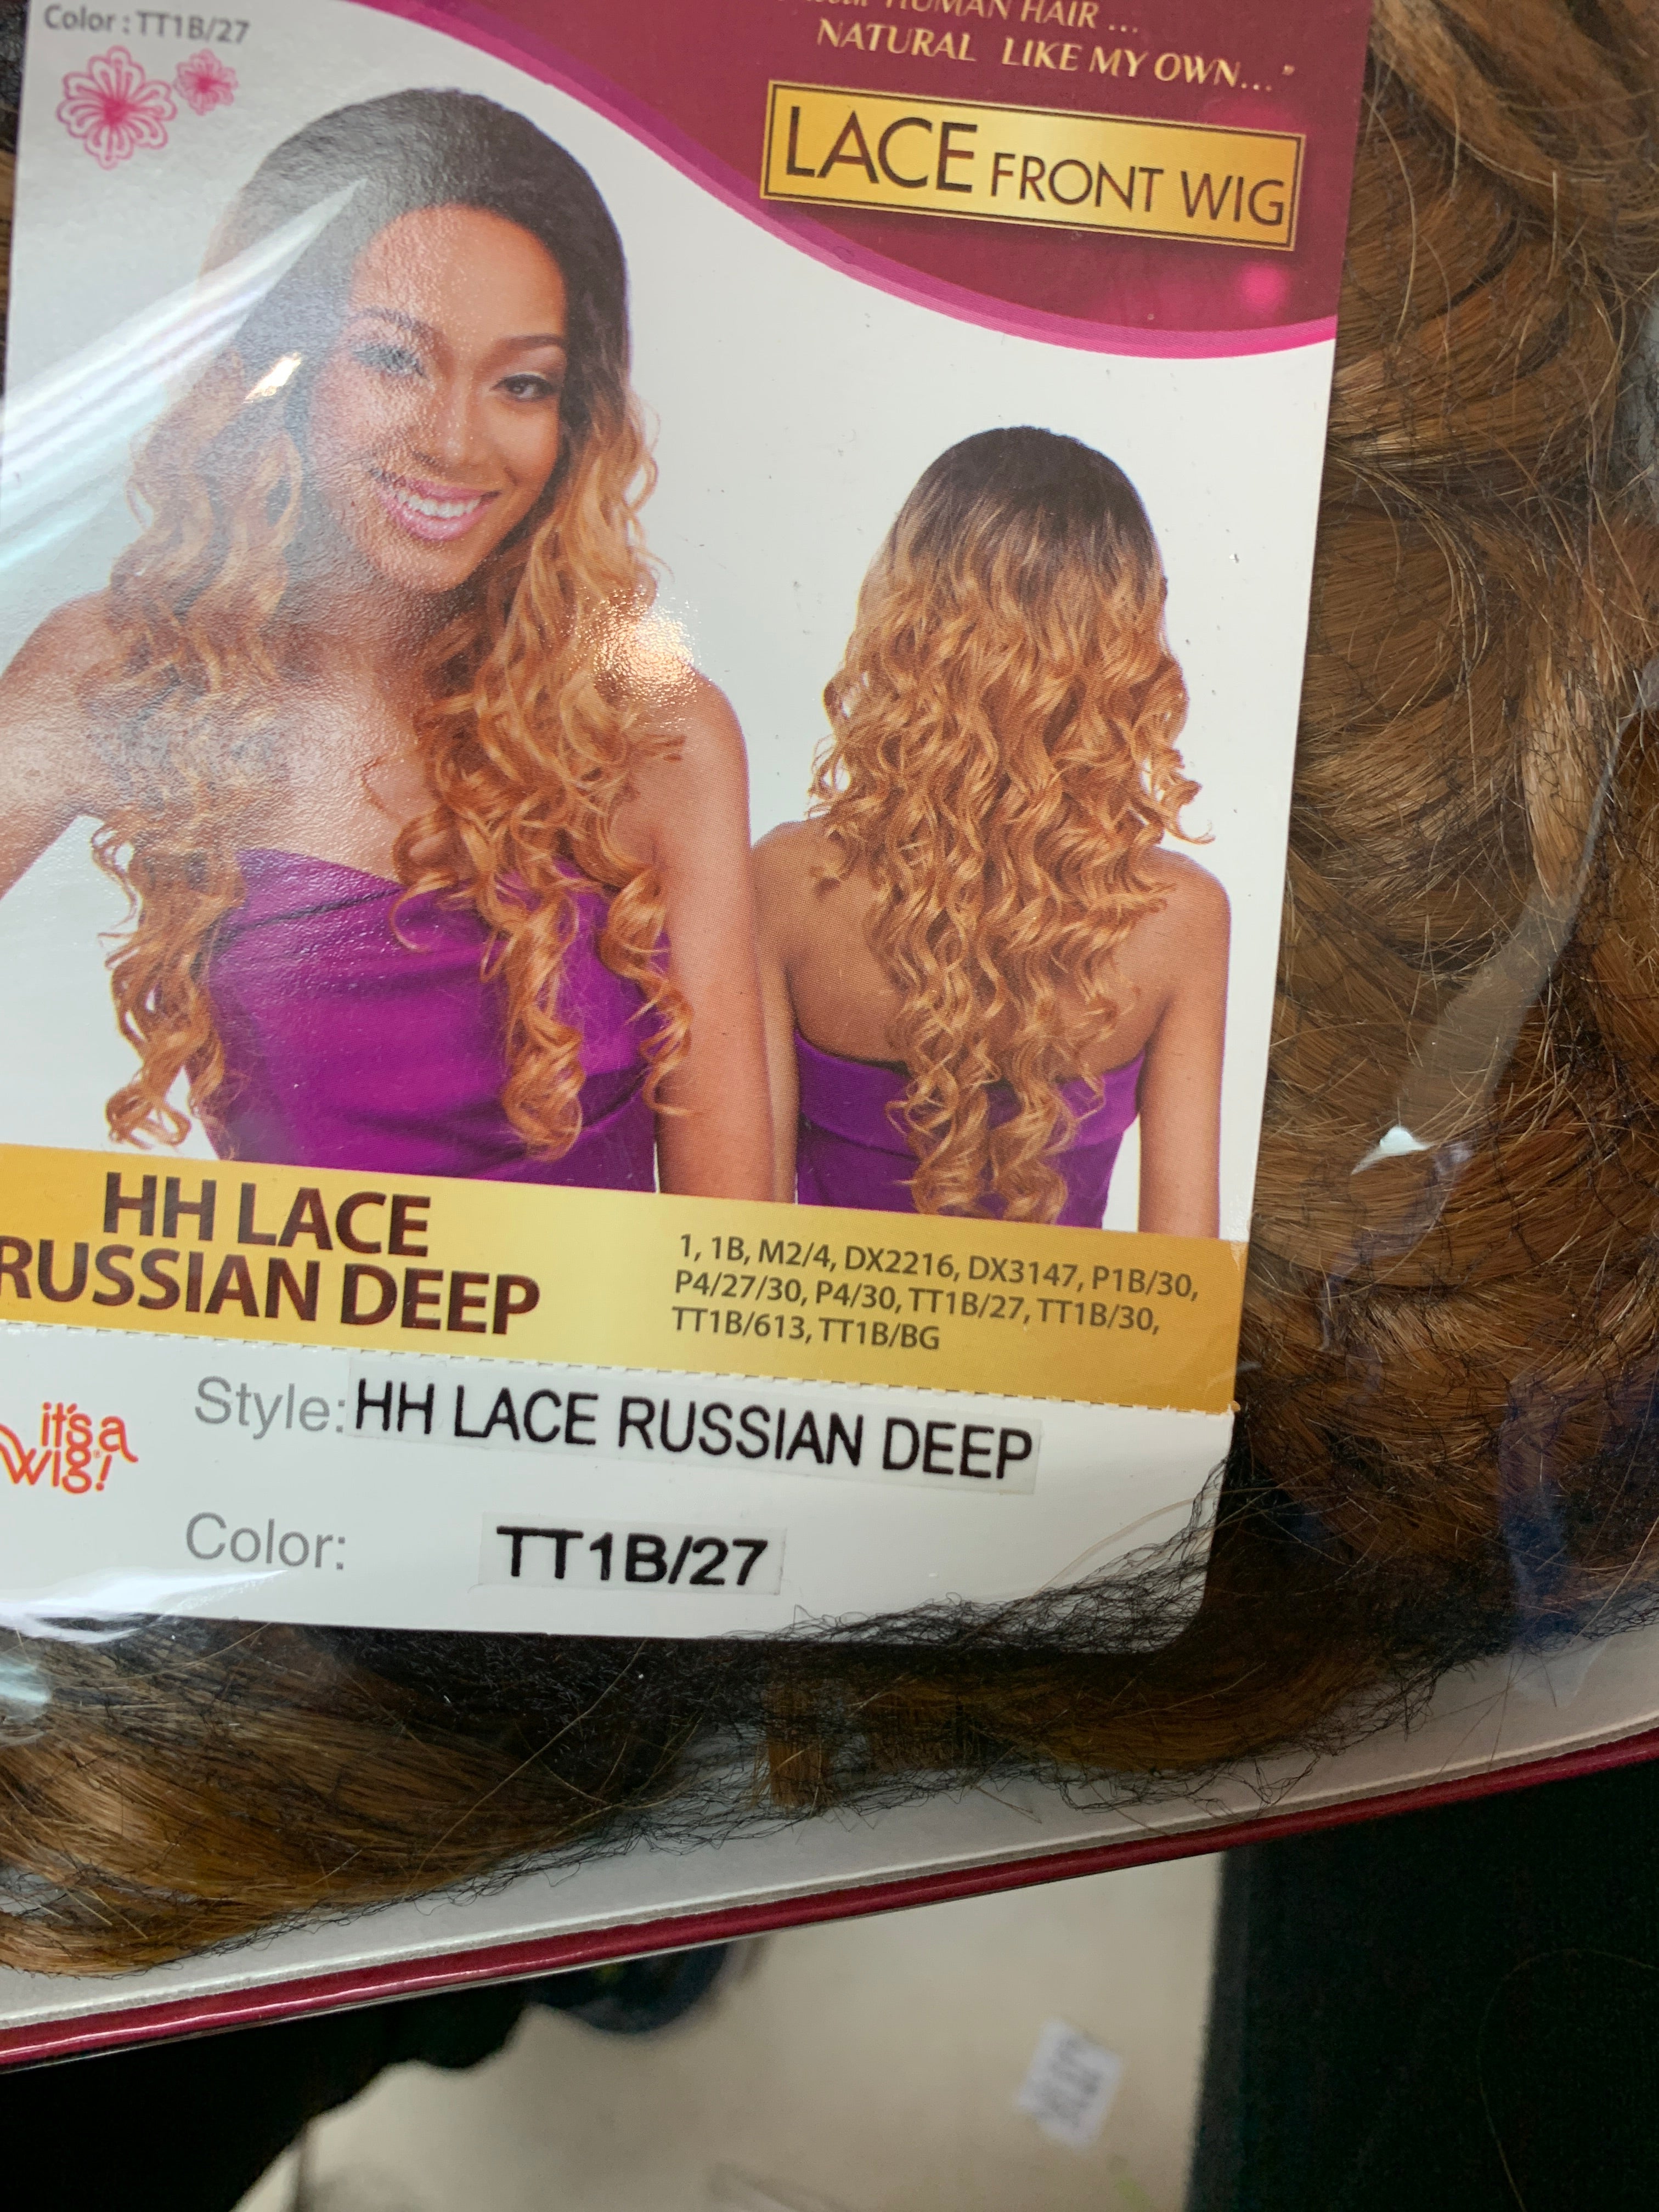 It’s a wig hh lace russian deep